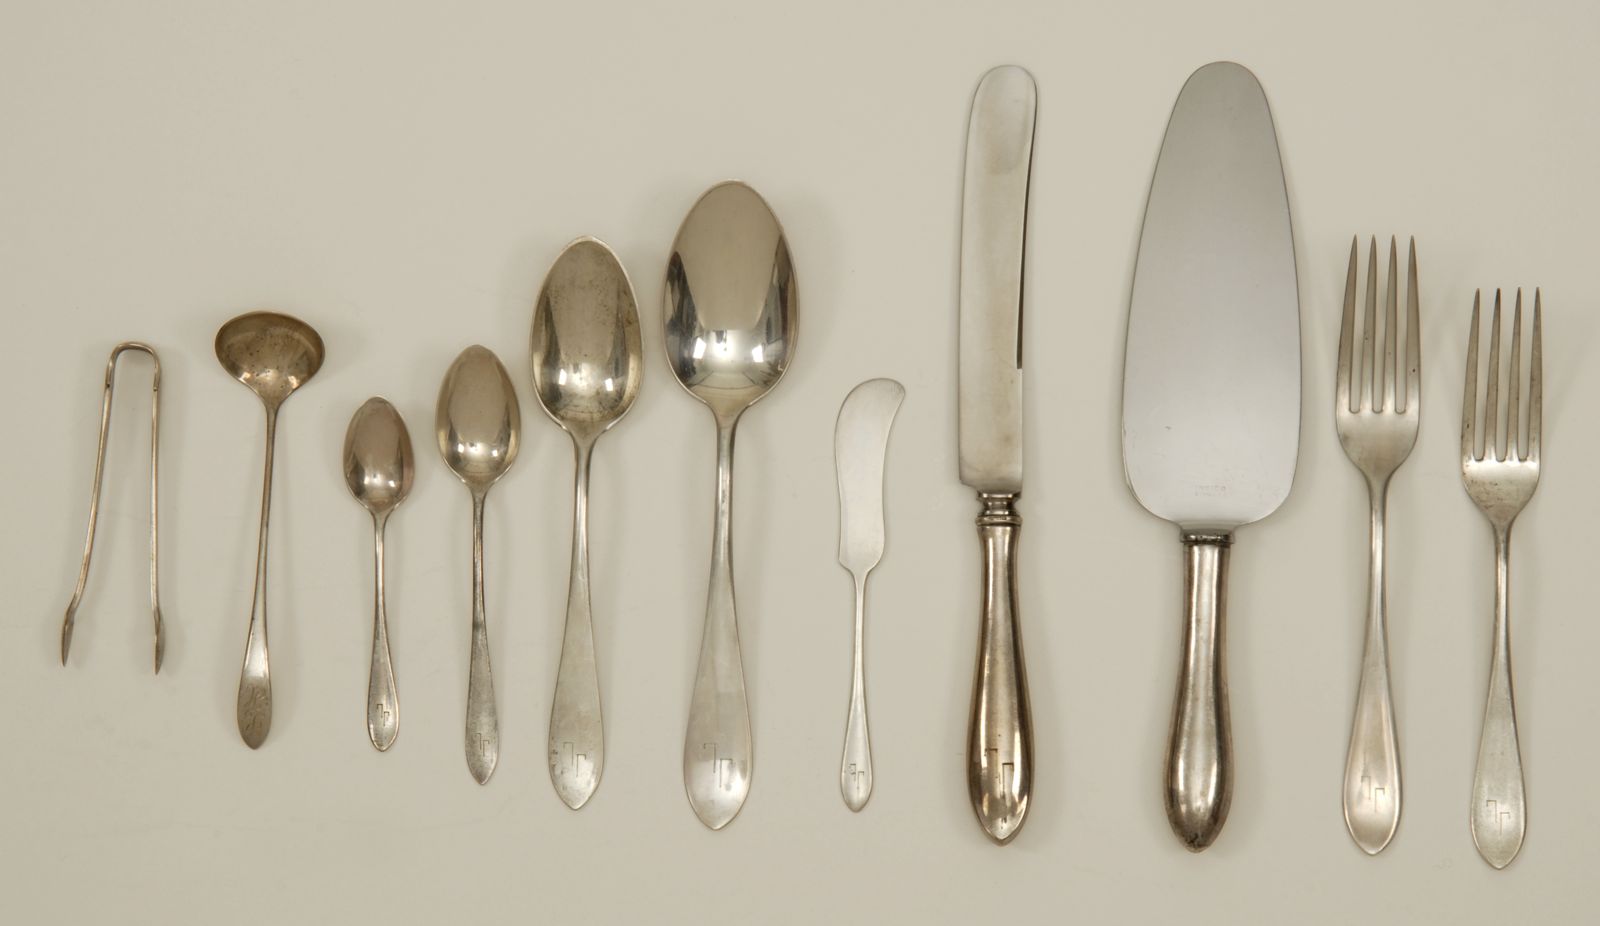 TOWLE MFG. CO. STERLING SILVER FLATWARE